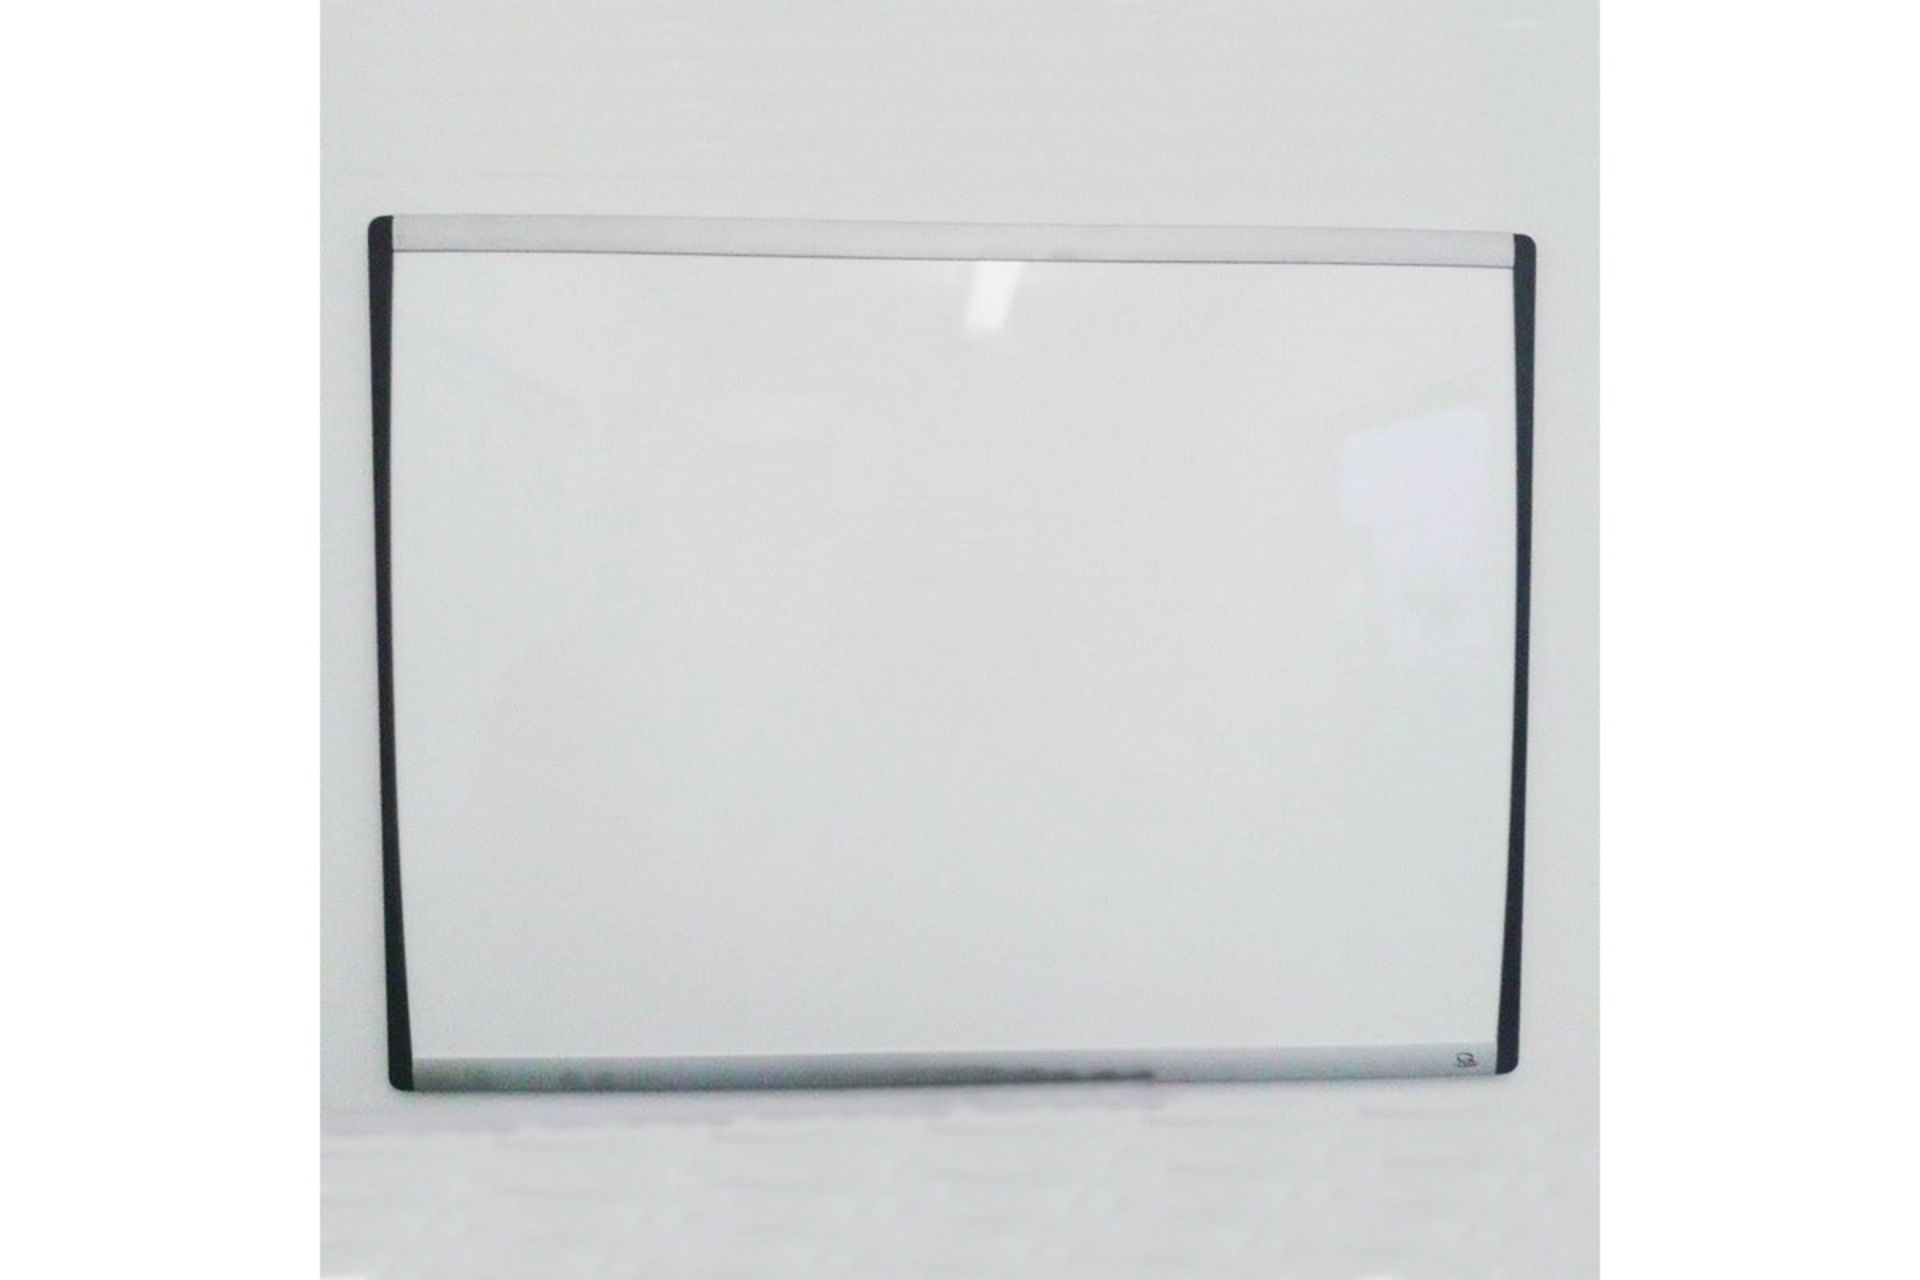 V Brand New Magnetic Whiteboard (size: 60CM x 45CM) Frame made from high quality aluminium